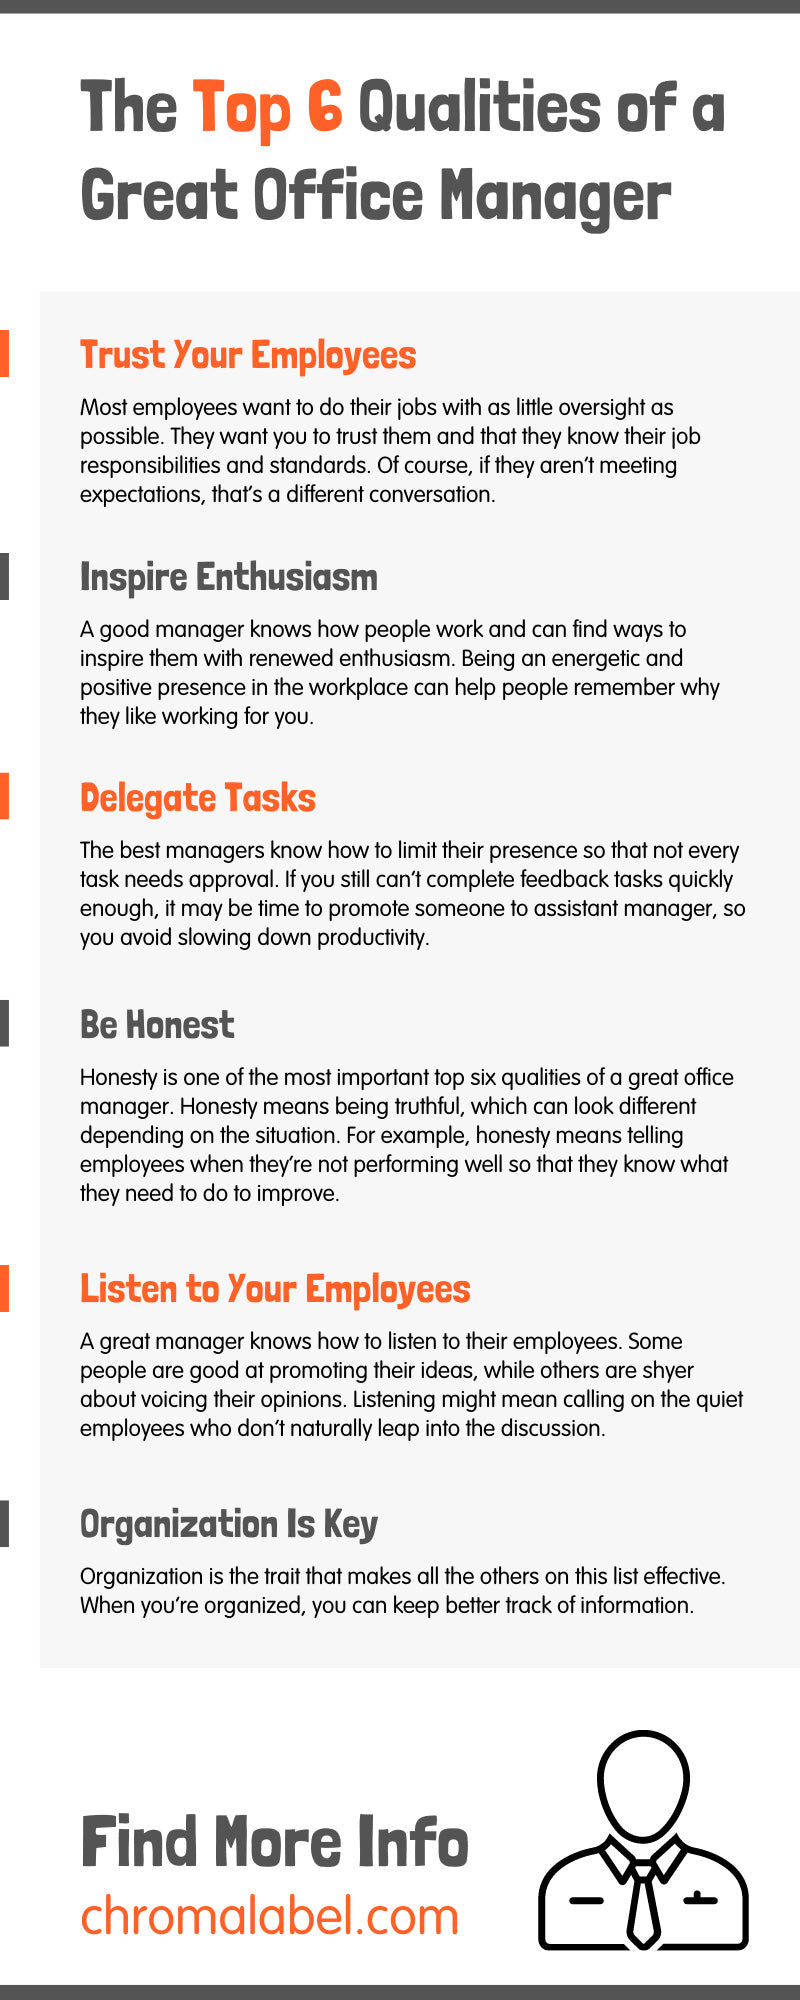 The Top 6 Qualities of a Great Office Manager